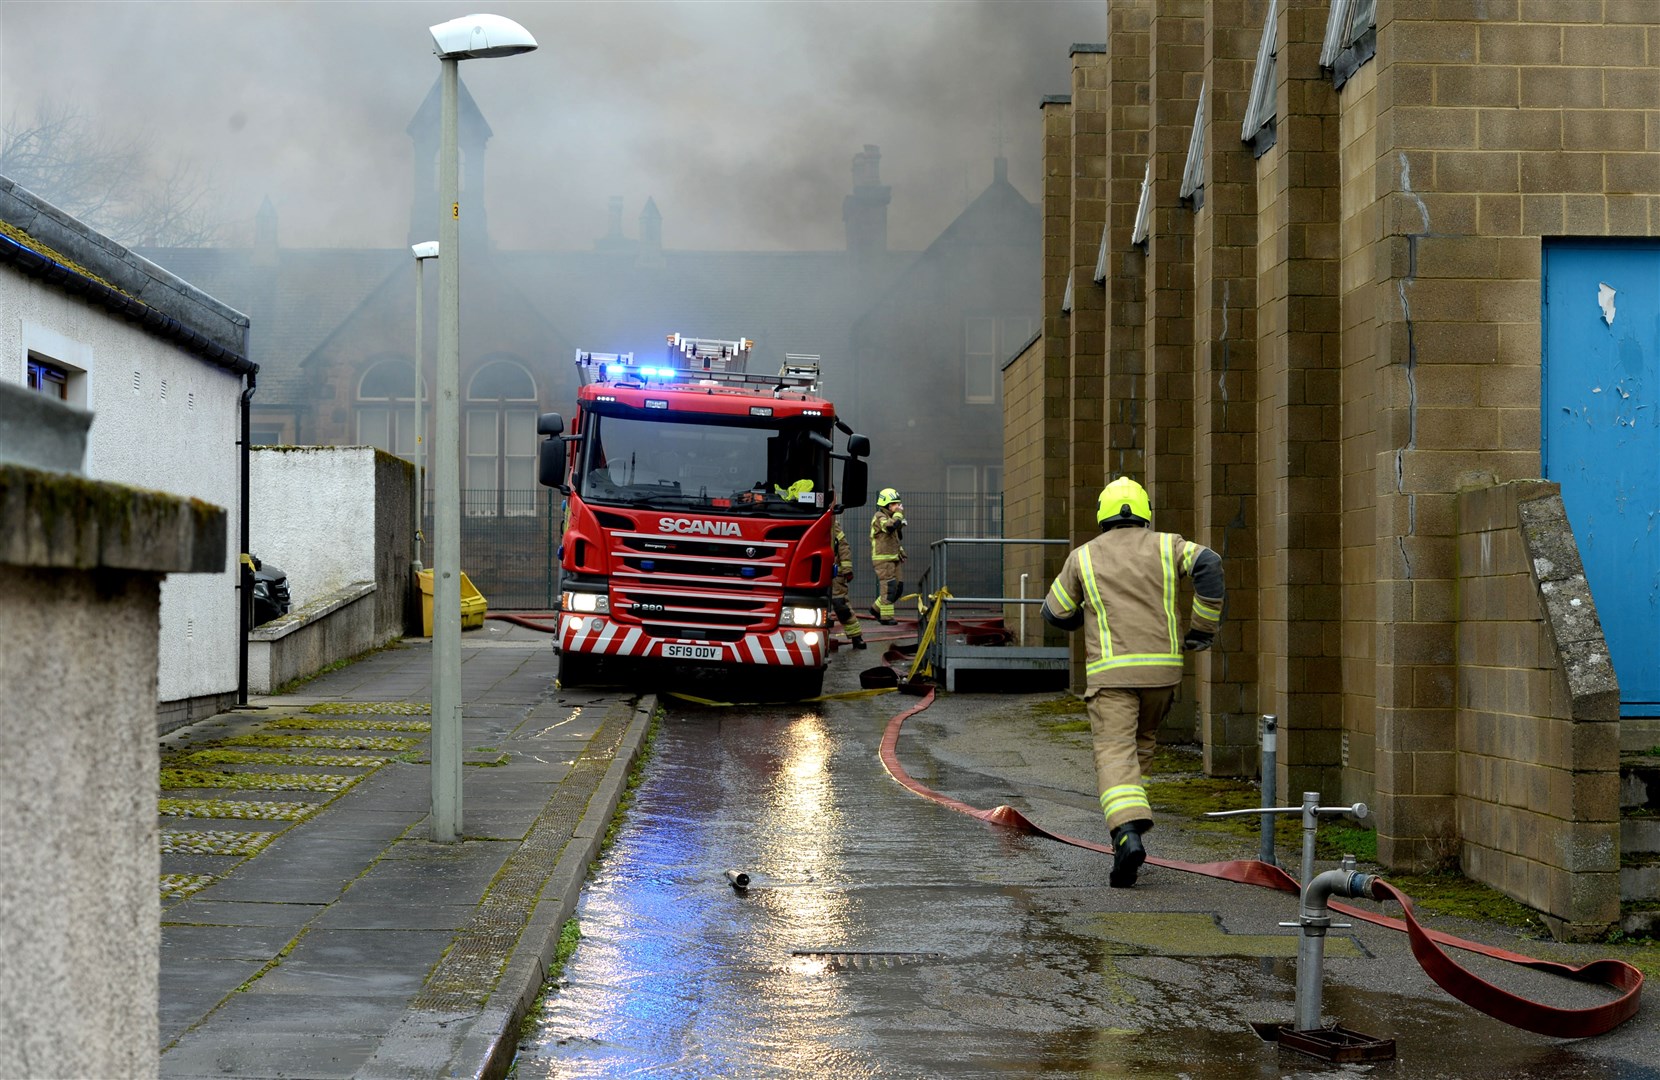 Smoke billowing above Park Primary School during the fire. Picture: James MacKenzie.